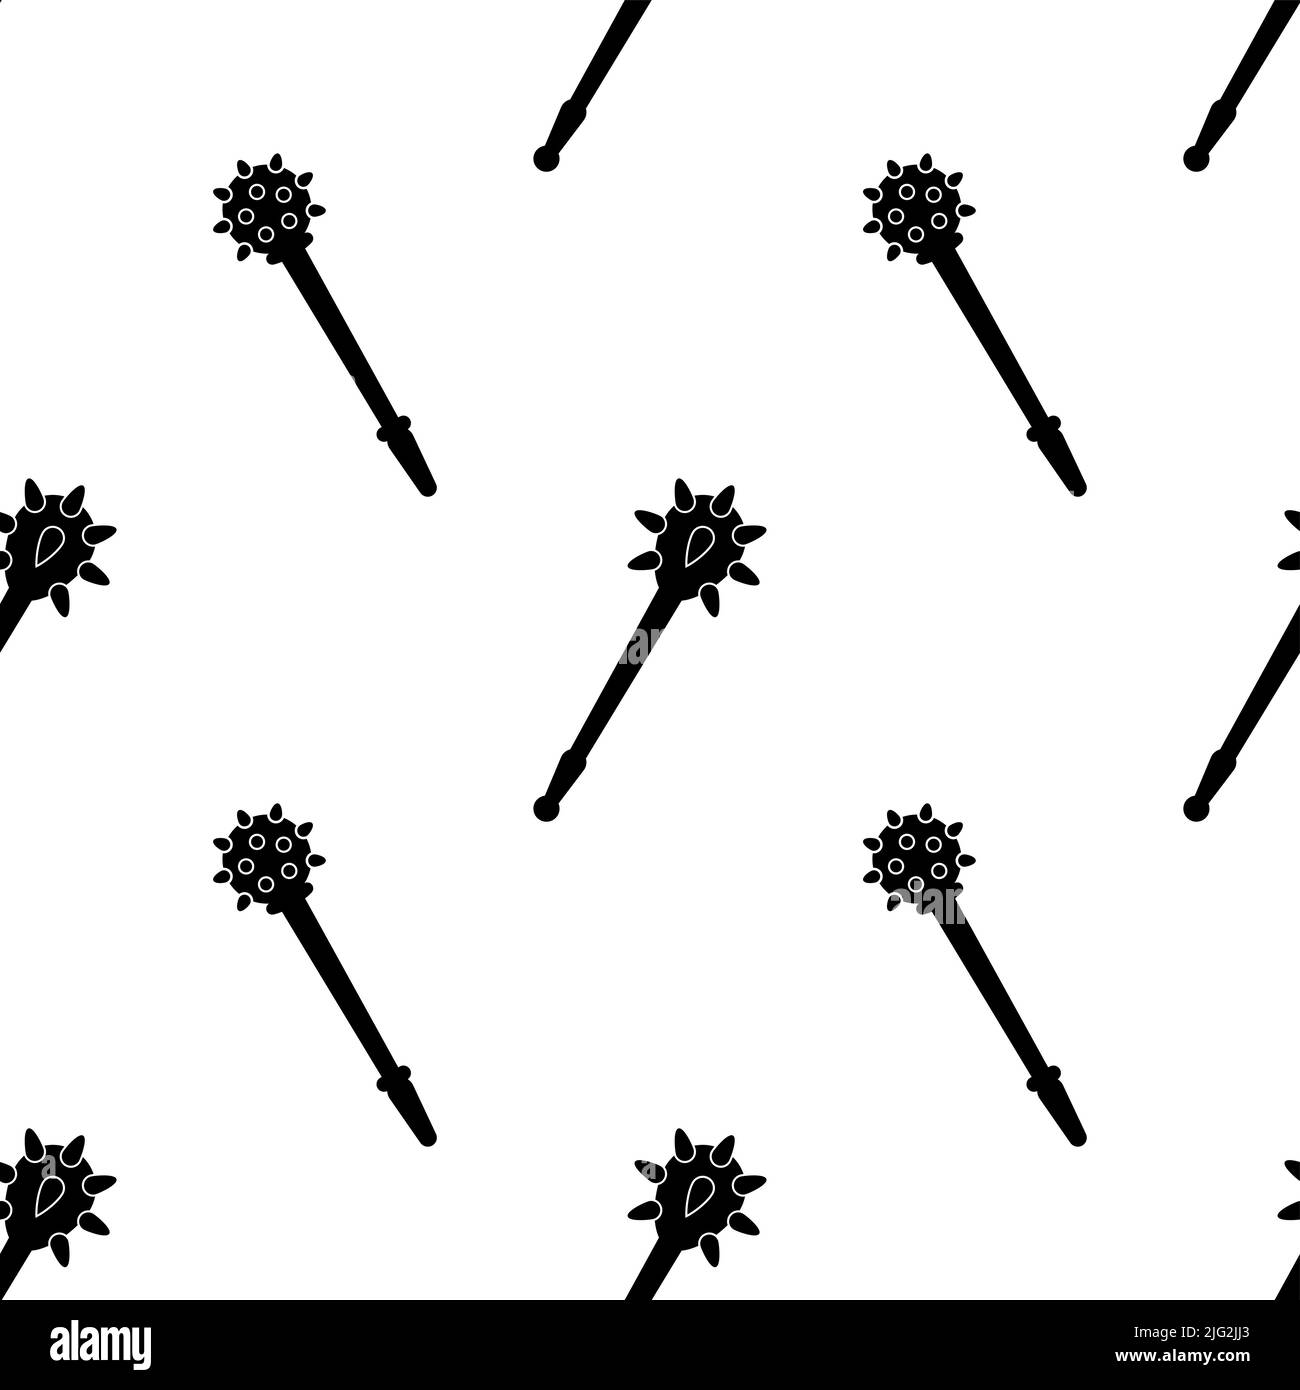 Mace Icon Seamless Pattern, Blunt Weapon Icon, Spiked, Flanged Metal Head Stick Vector Art Illustration Stock Vector